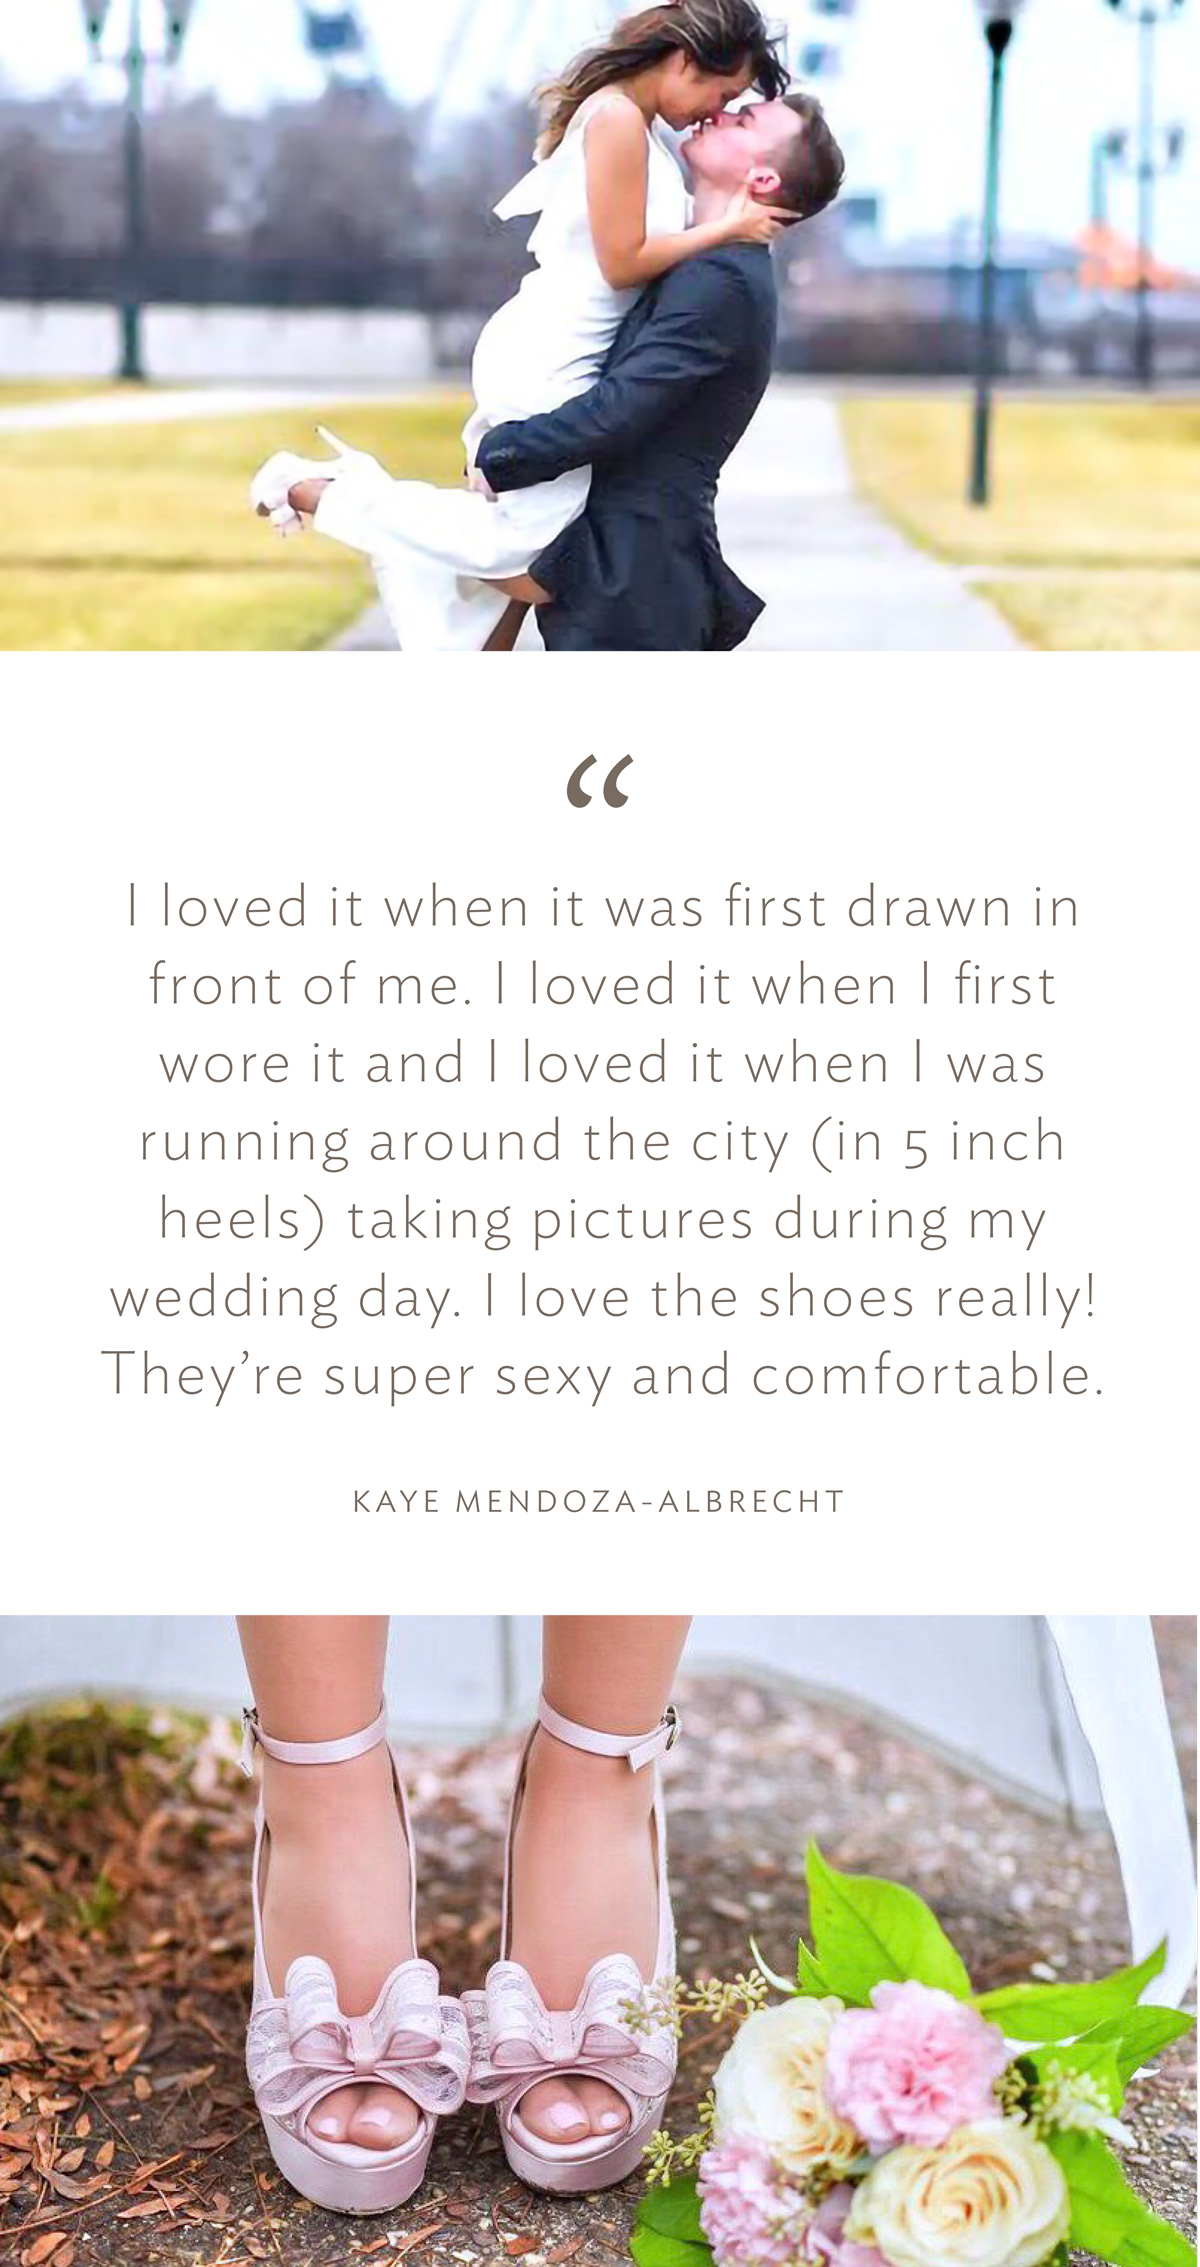 “I loved it when it was first drawn in front of me. I loved it when I first wore it and I loved it when I was running around the city (in 5 inch heels) taking pictures during my wedding day. I love the shoes really! They’re super sexy and comfortable.” (Kaye Mendoza-Albrecht)